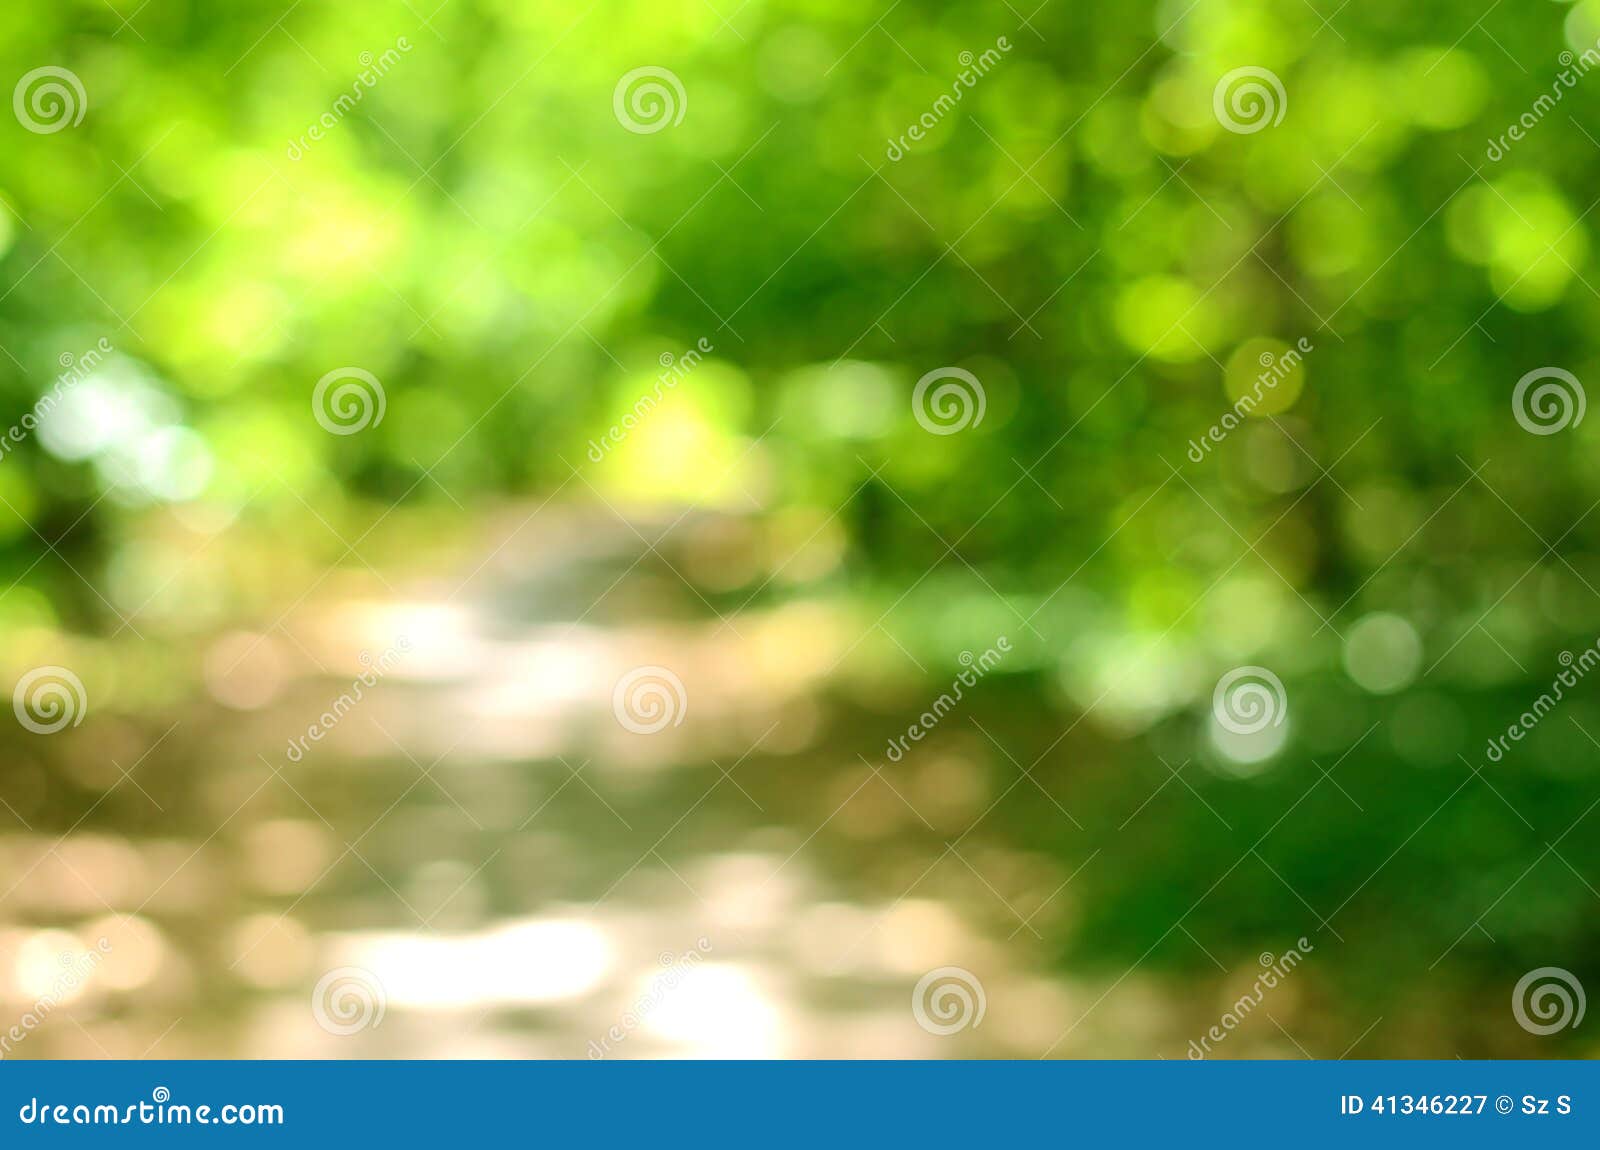 Blurred forest background stock image. Image of blur - 41346227